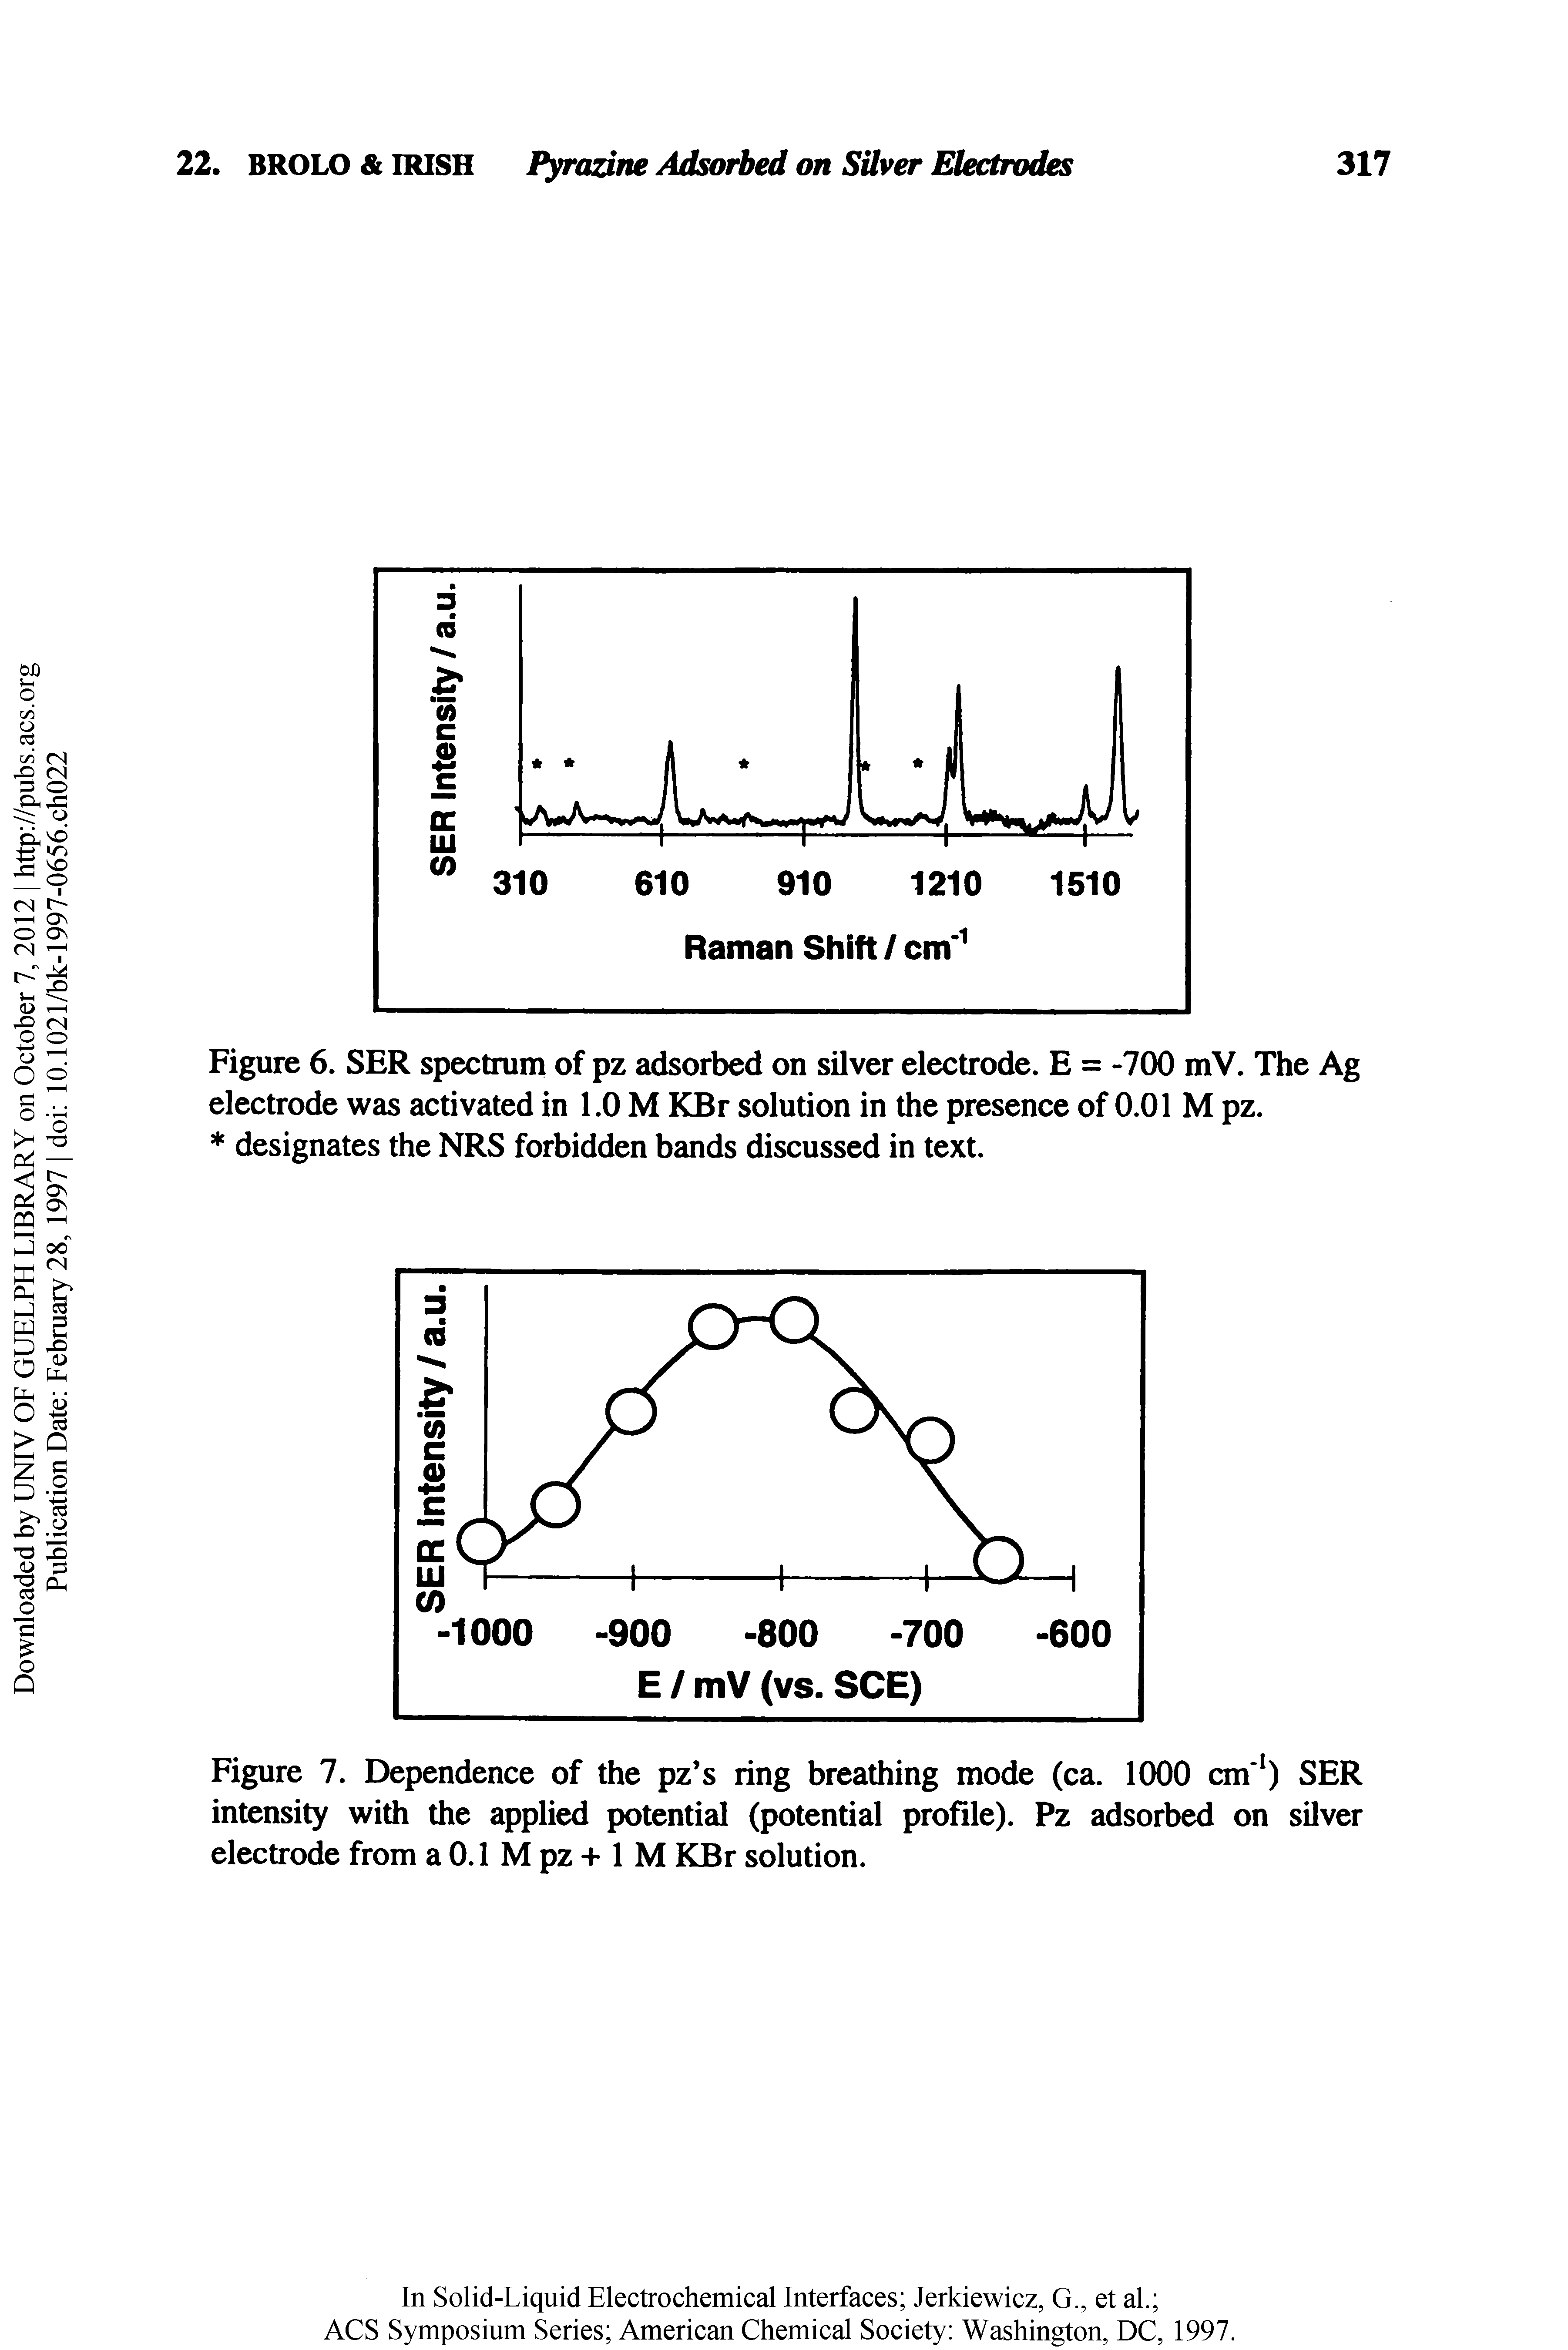 Figure 6. SER spectrum of pz adsorbed on silver electrode. E = -700 mV. The Ag electrode was activated in 1.0 M KBr solution in the presence of 0.01 M pz.